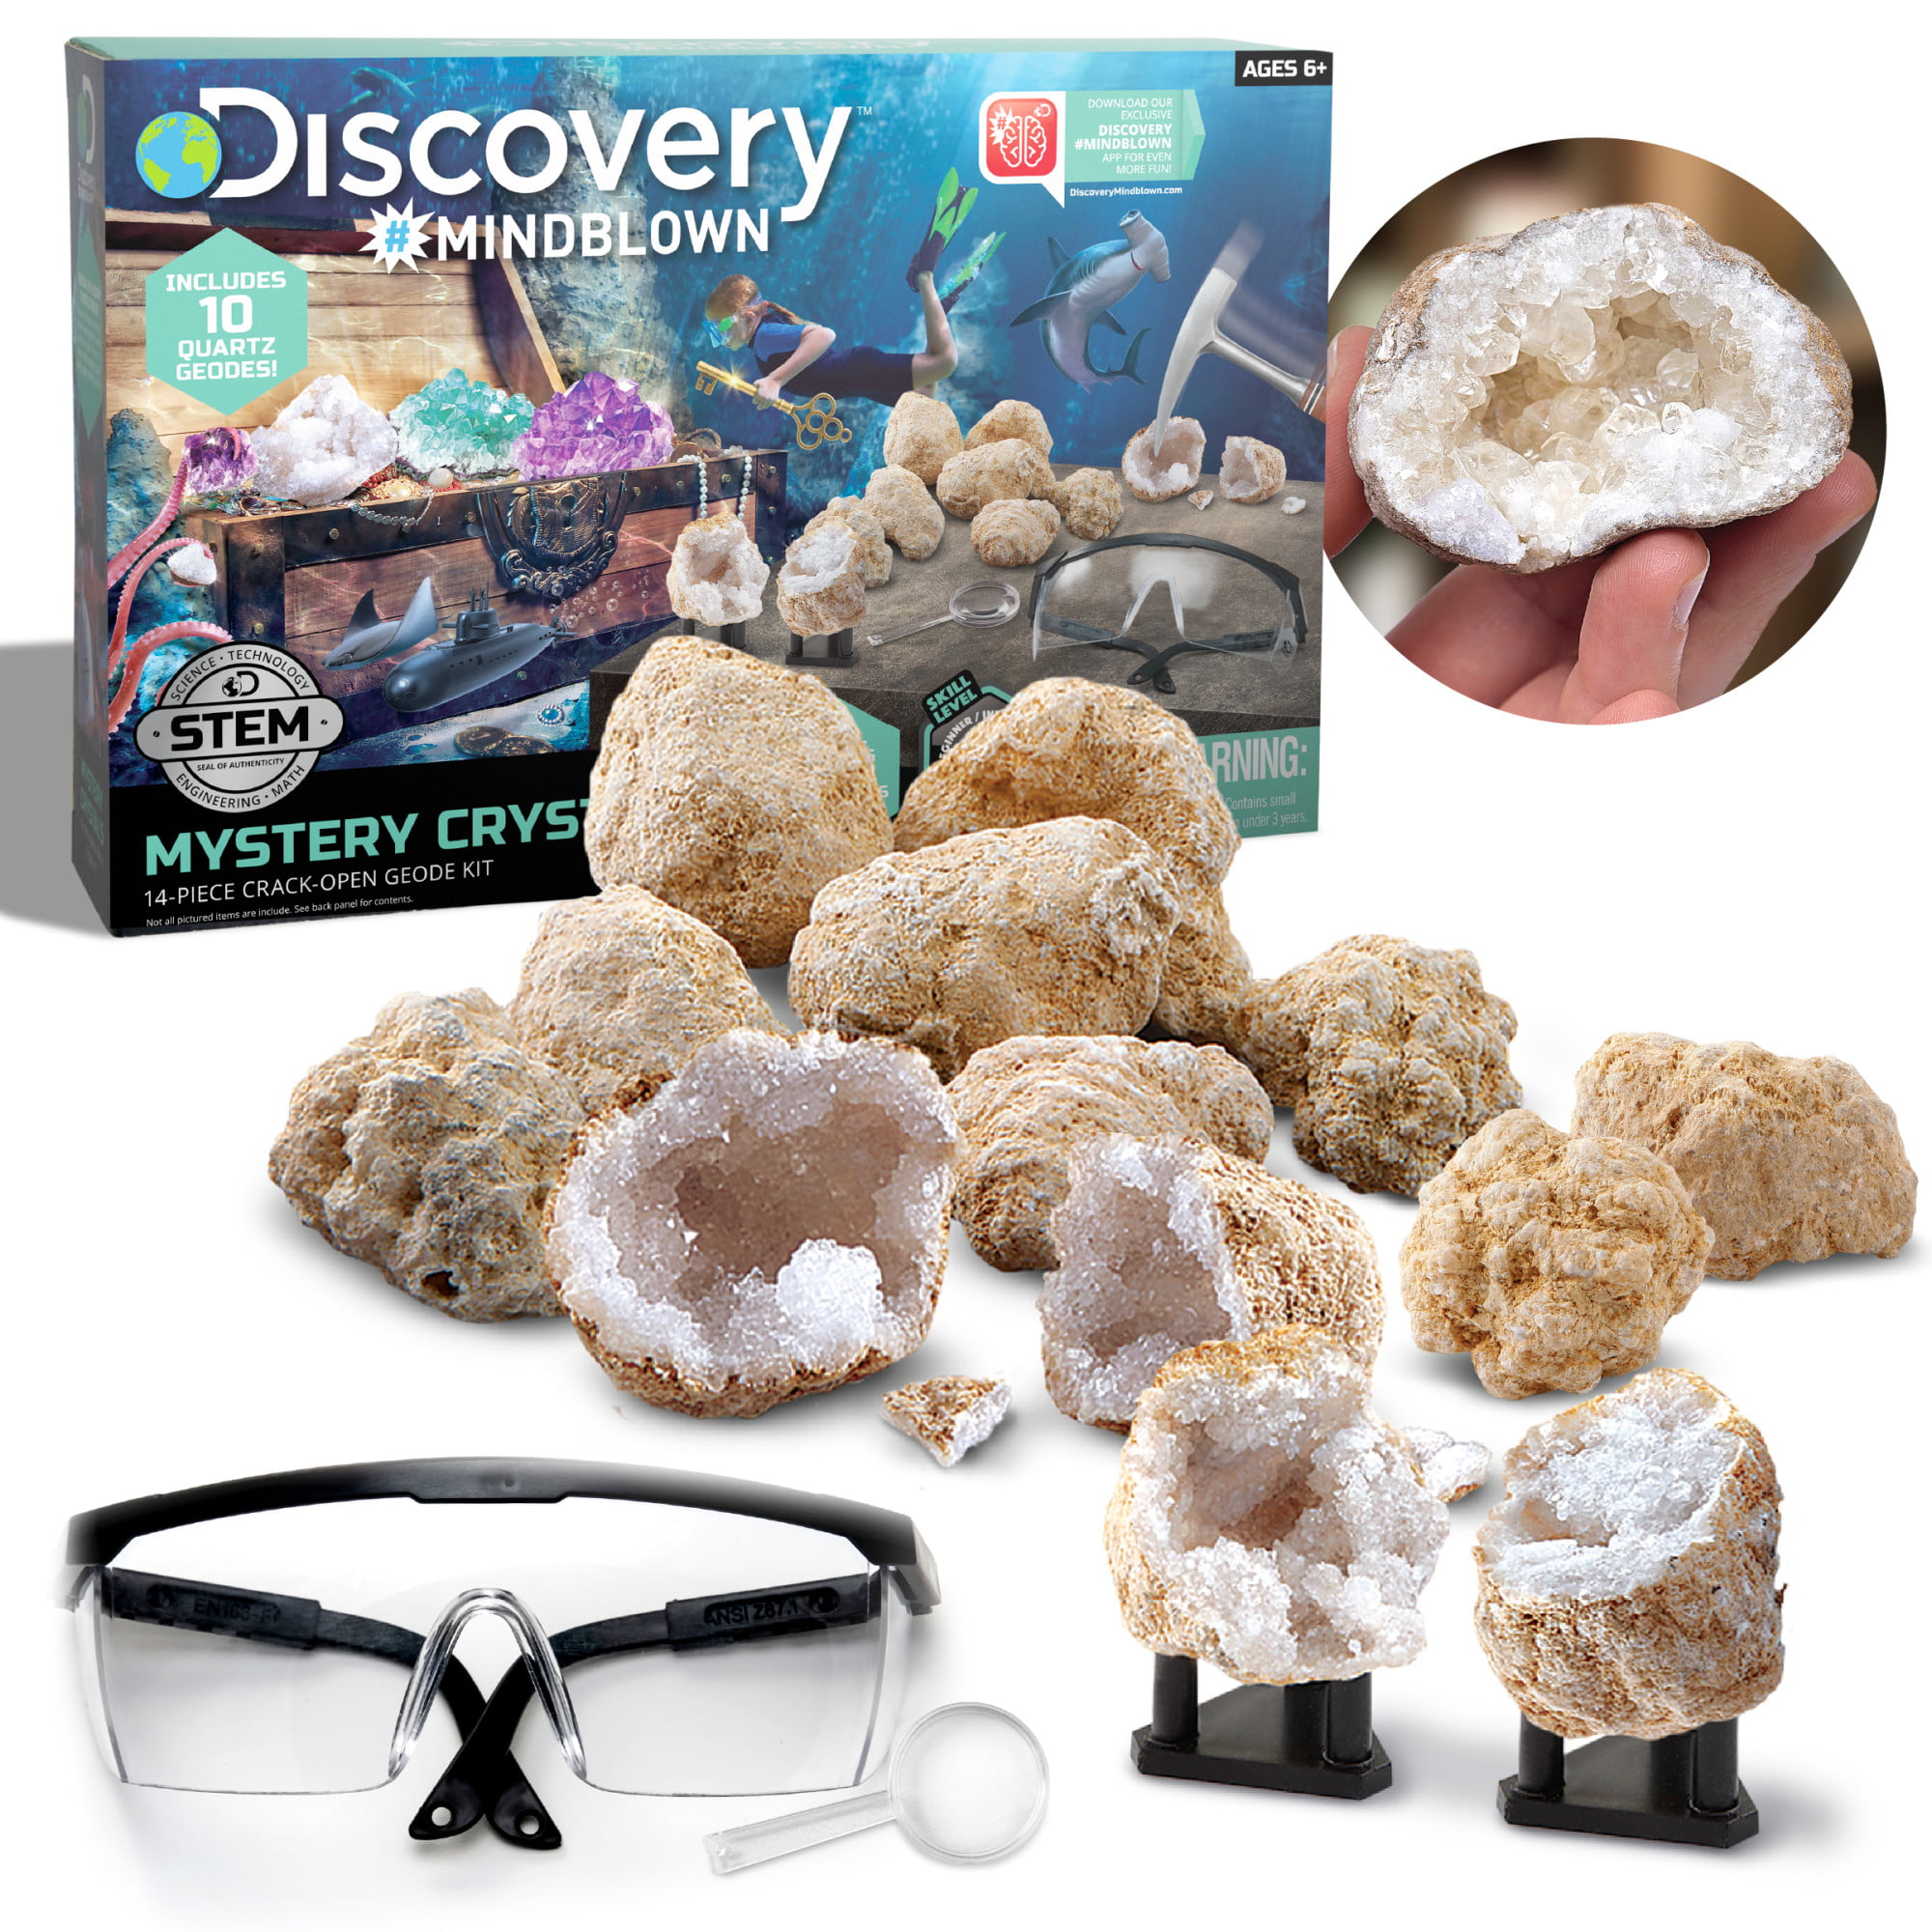 Detailed NATIONAL GEOGRAPHIC Break Open 10 Premium Geodes Includes Goggles 